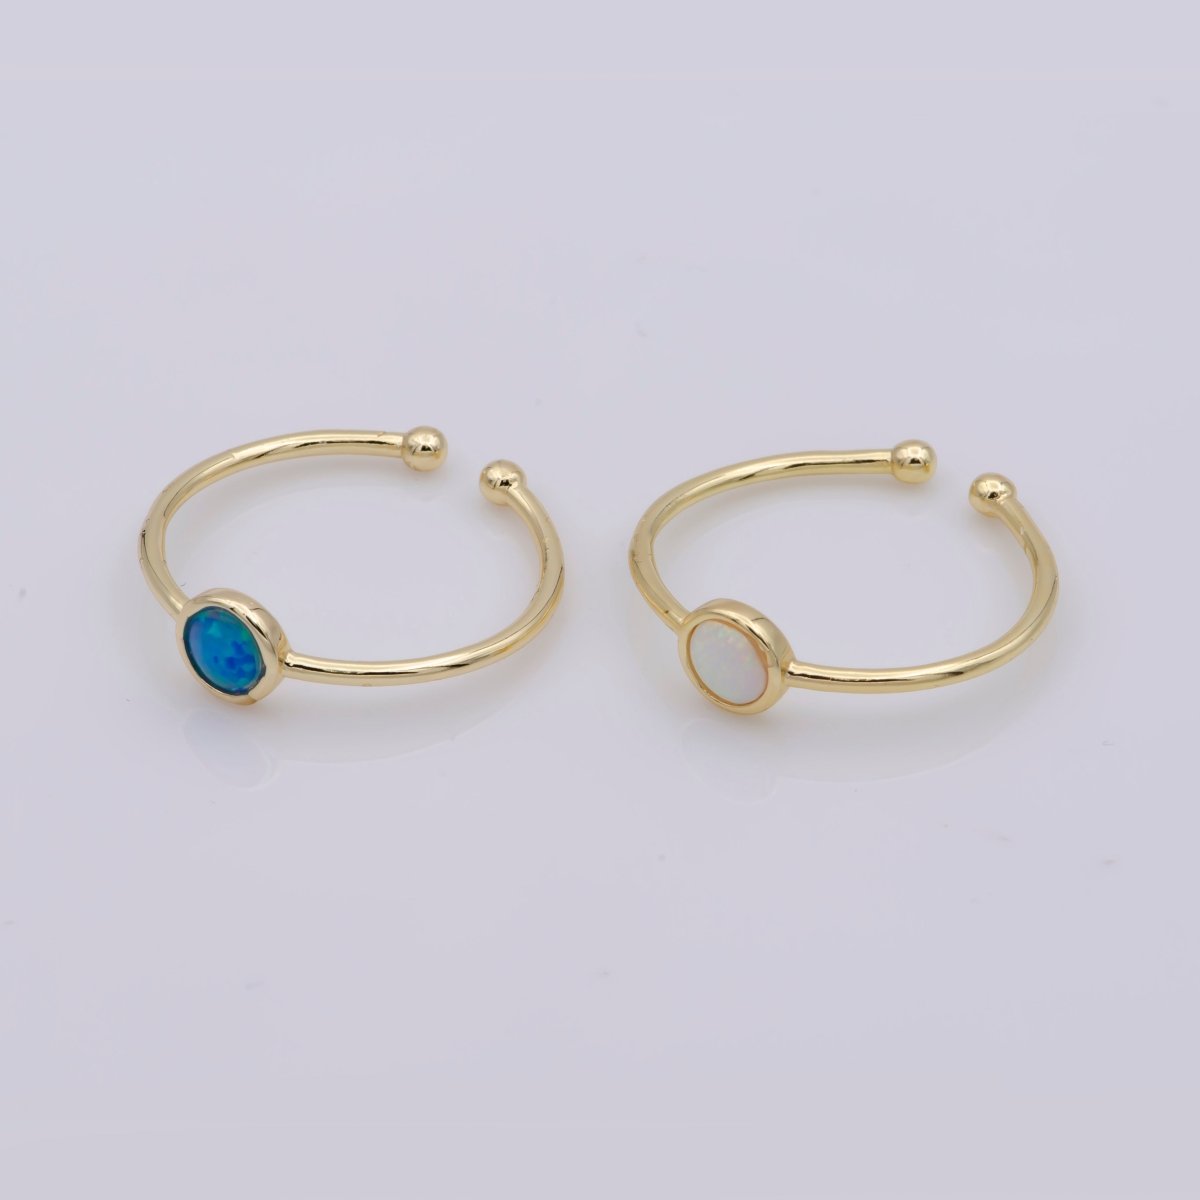 Dainty 18K Gold Filled Round Opal Stone Adjustable Ring, Blue Opal & White Opal Stacking Ring O524, O525 - DLUXCA